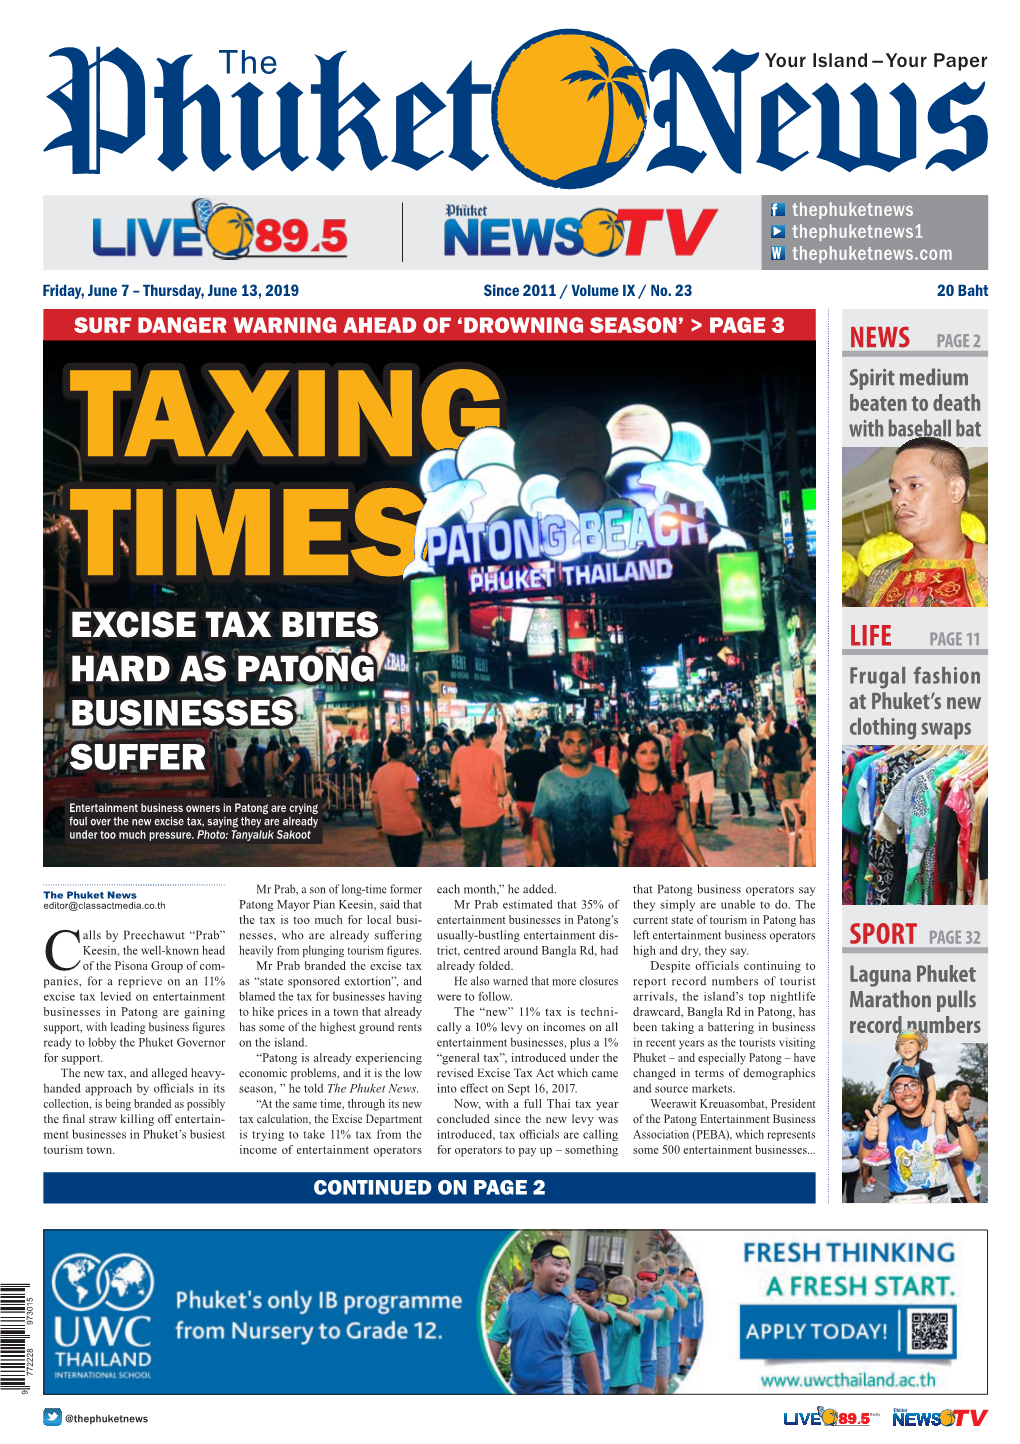 Excise Tax Bites Hard As Patong Businesses Suffer